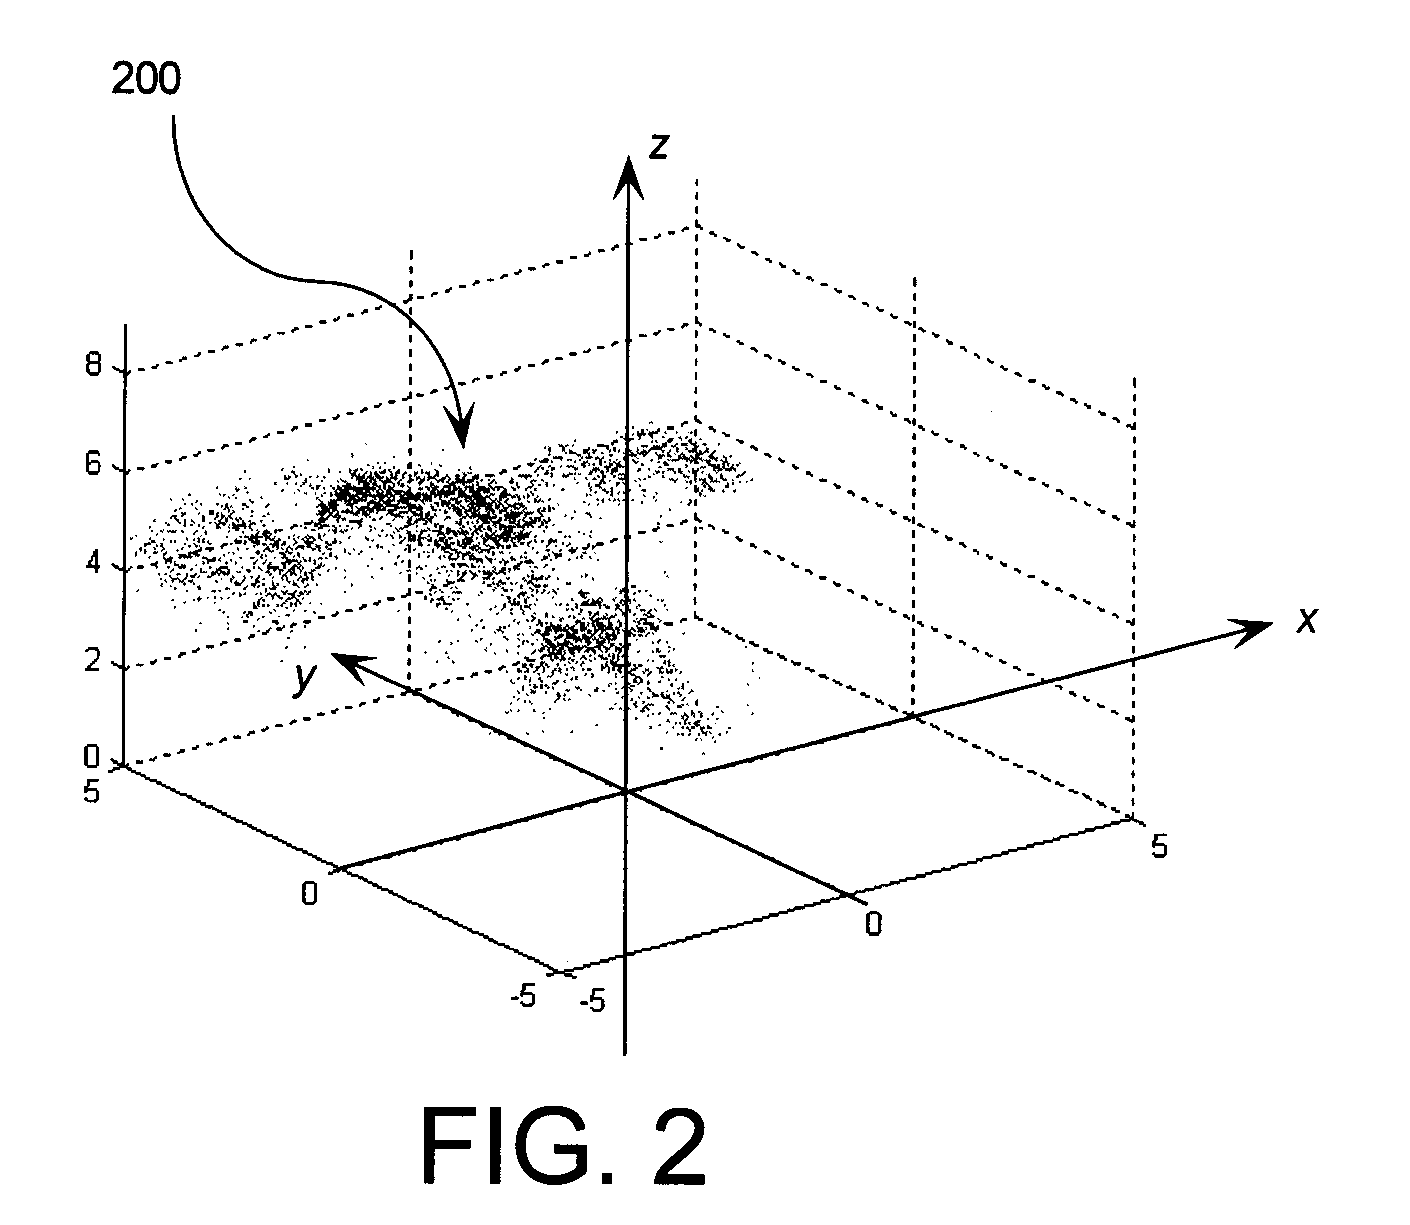 Method for visualization of point cloud data